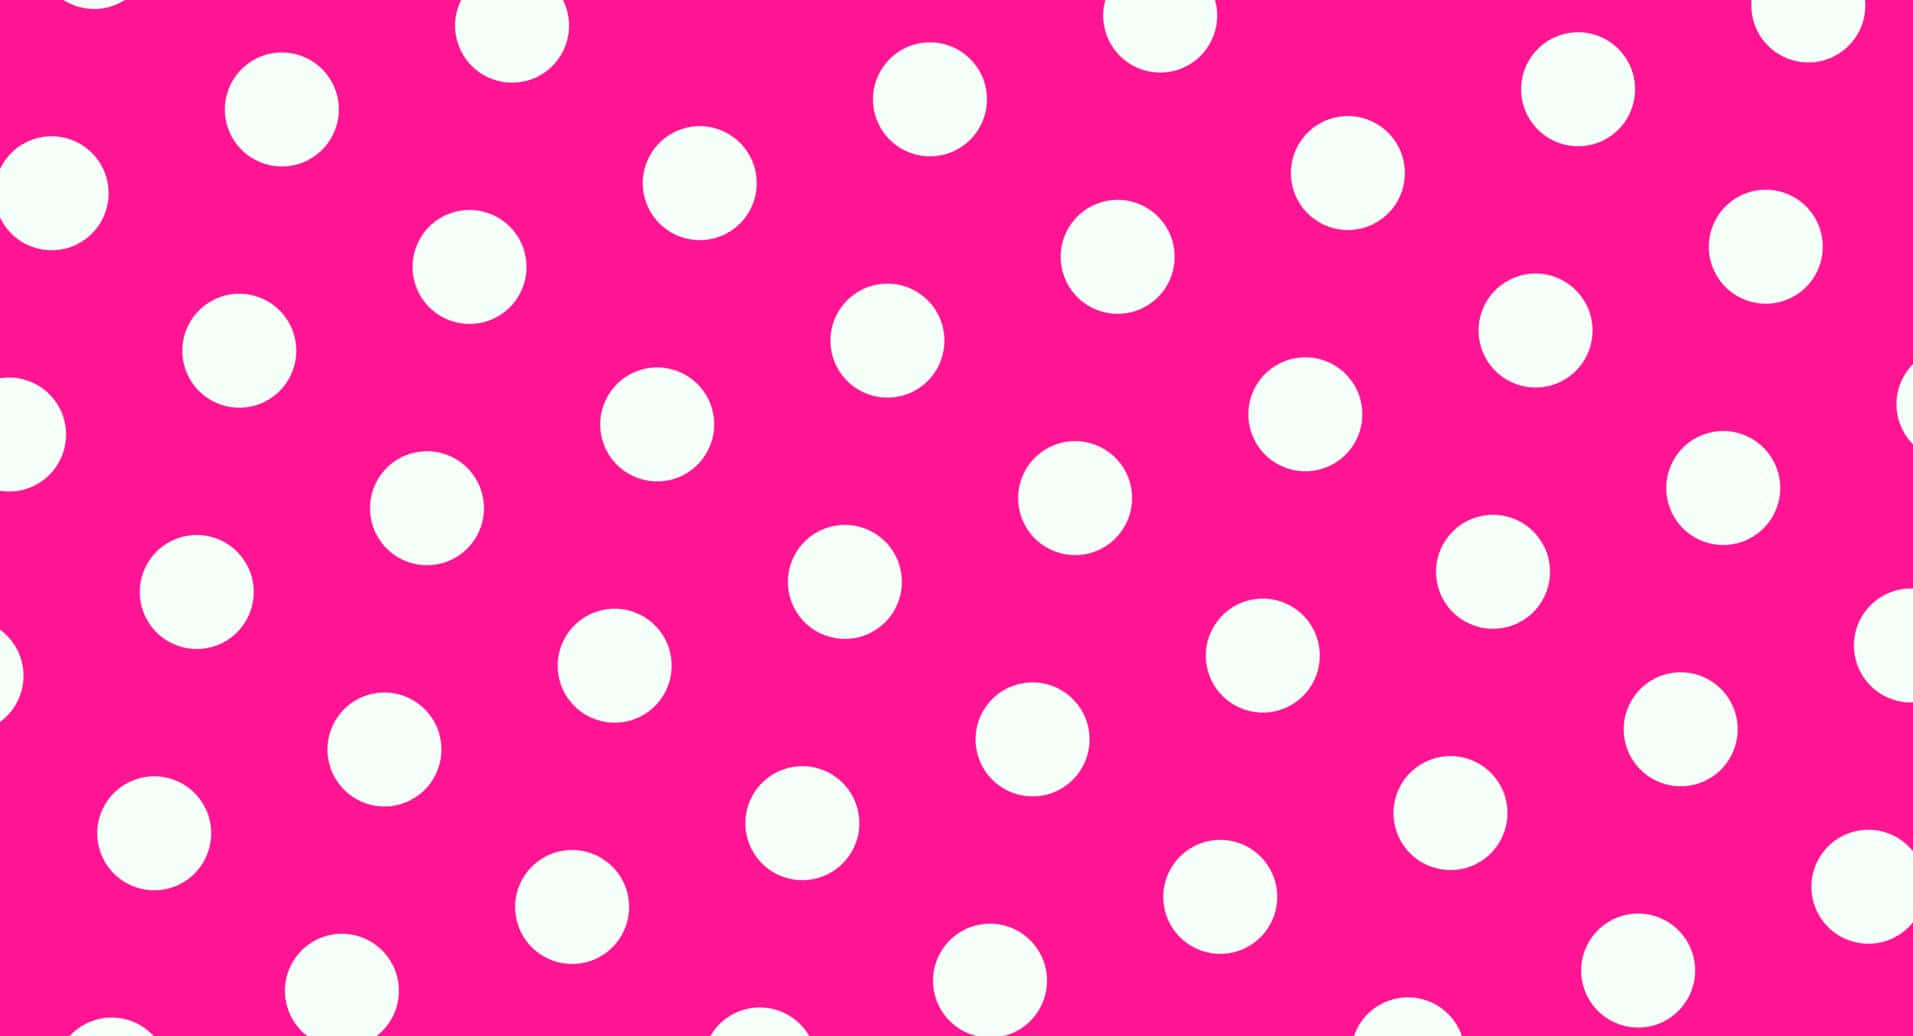 Get ready for the adventures of your dreams with this fun and bubbly pink and white polka dot pattern! Wallpaper